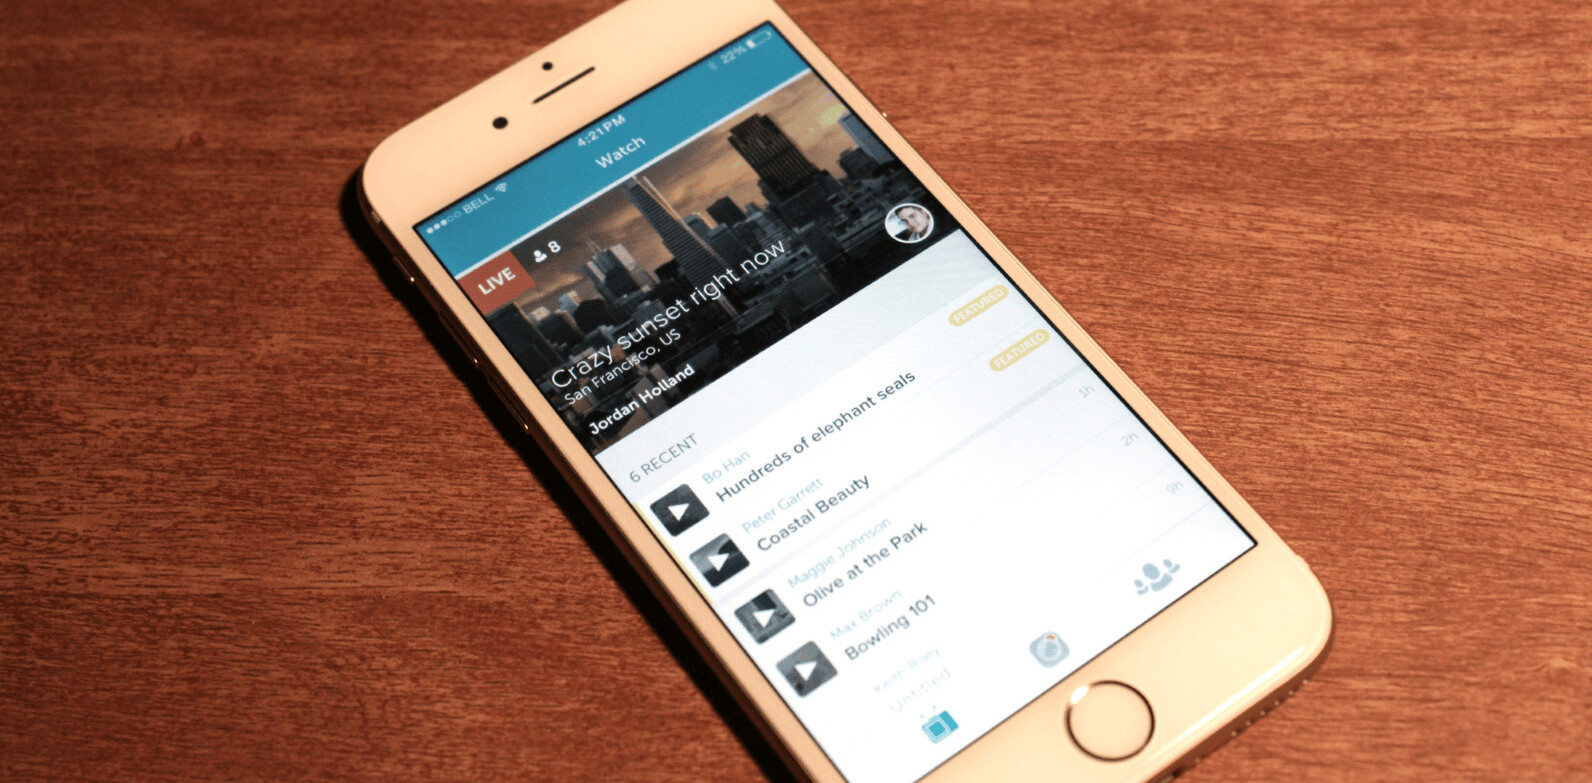 Periscope suicide could lead to closer scrutiny of live-streaming apps